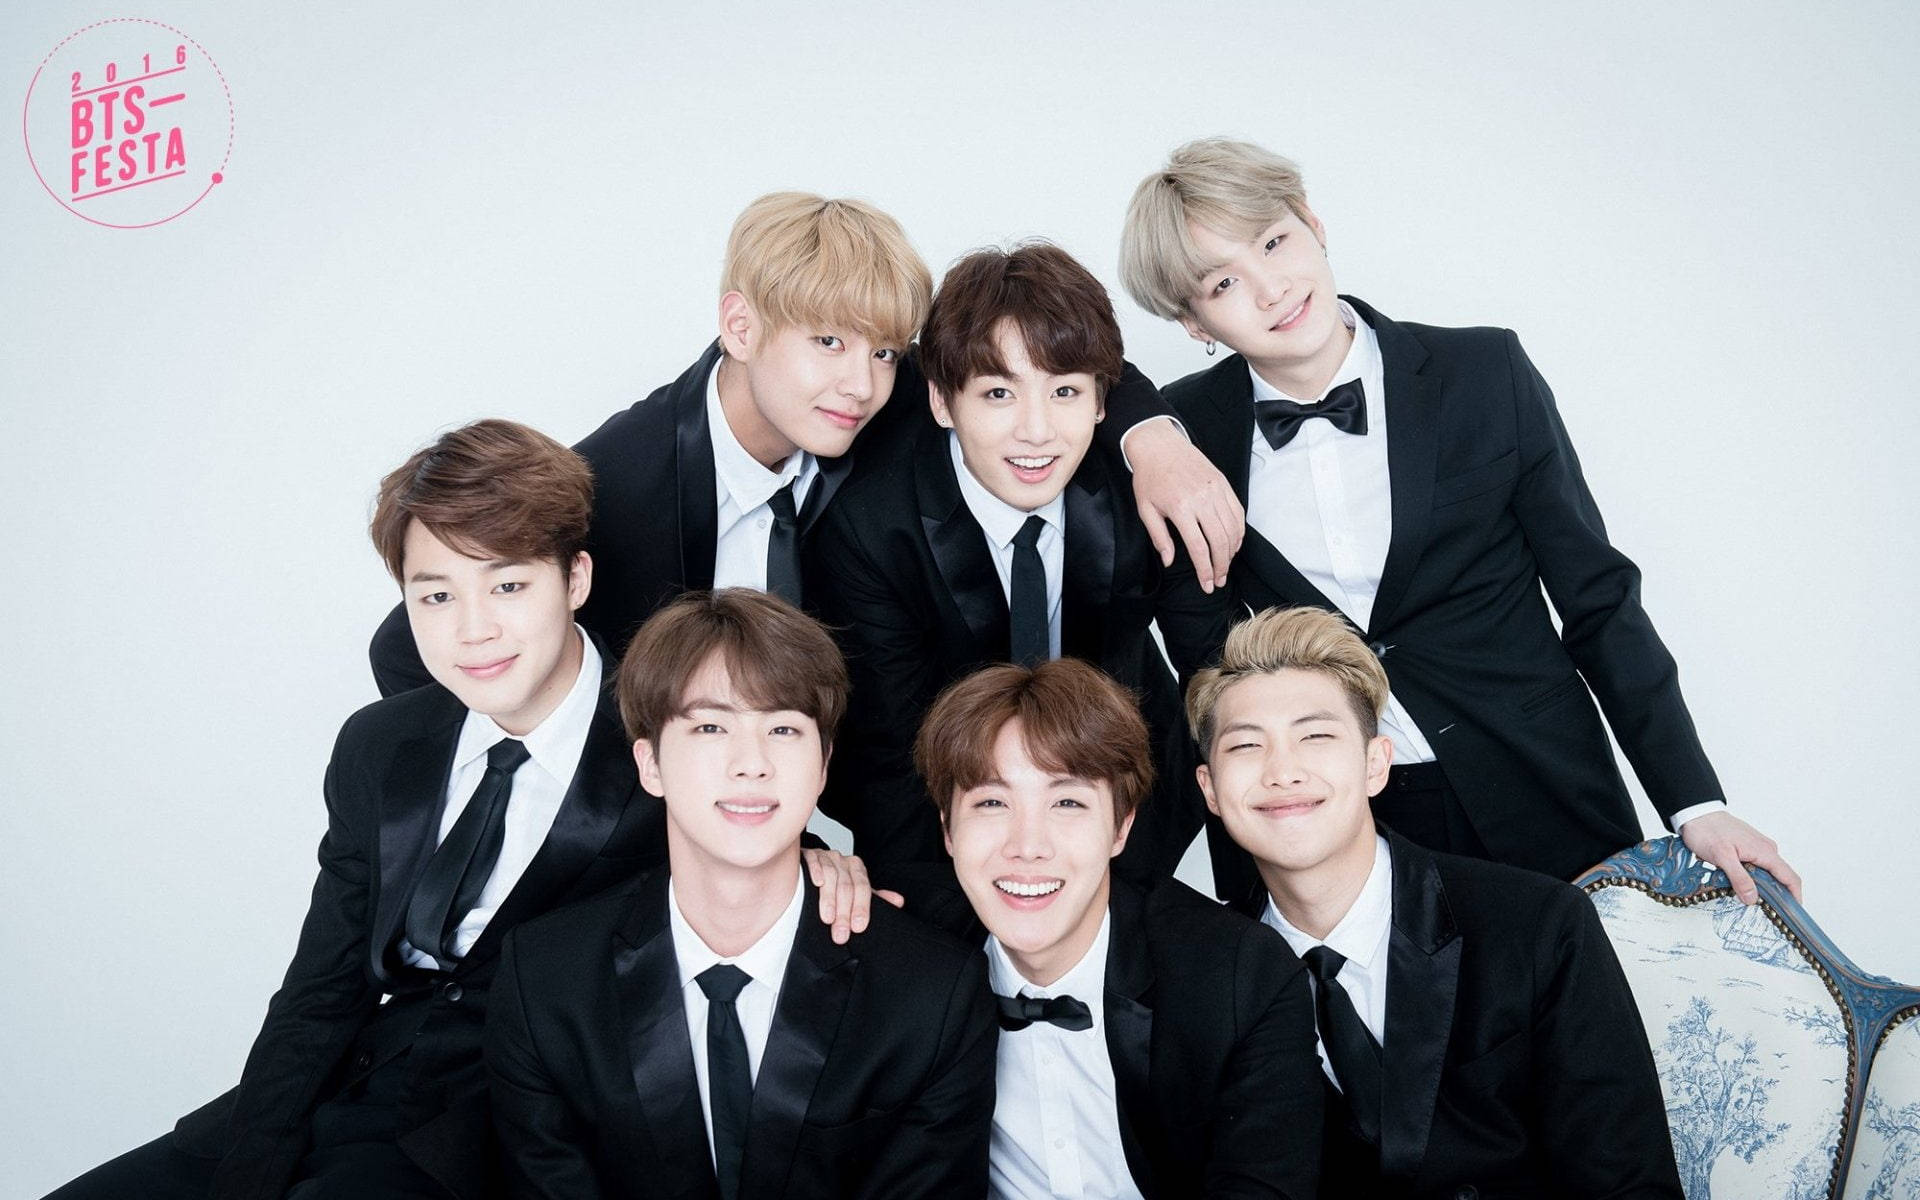 Bts Group Photo In Classy Suits Background